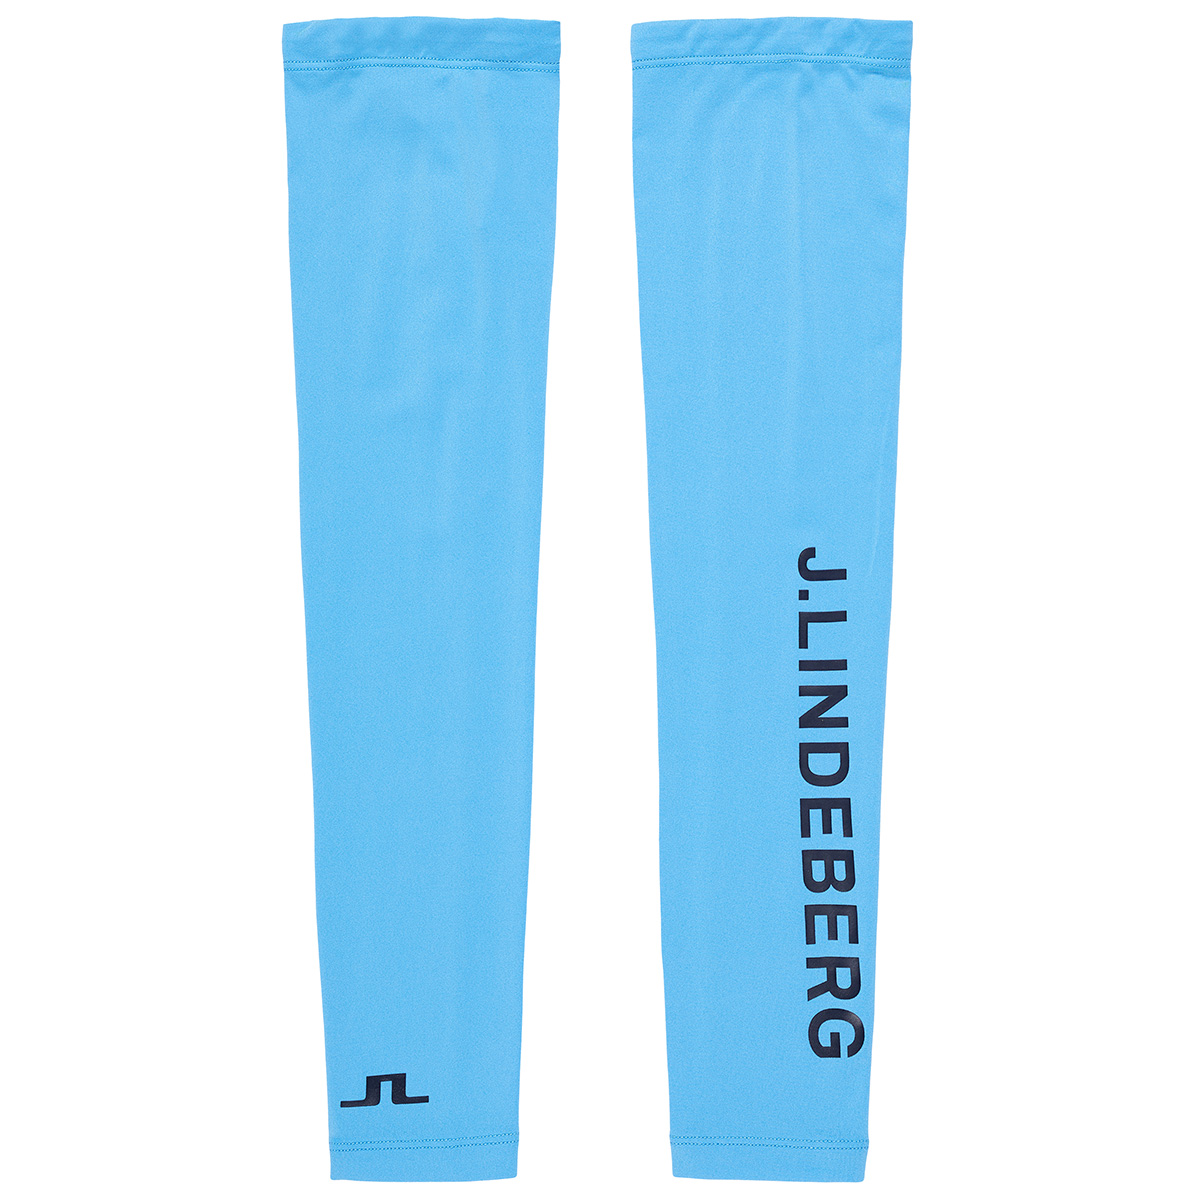 J.Lindeberg Men's Enzo Compression Golf Sleeves from american golf